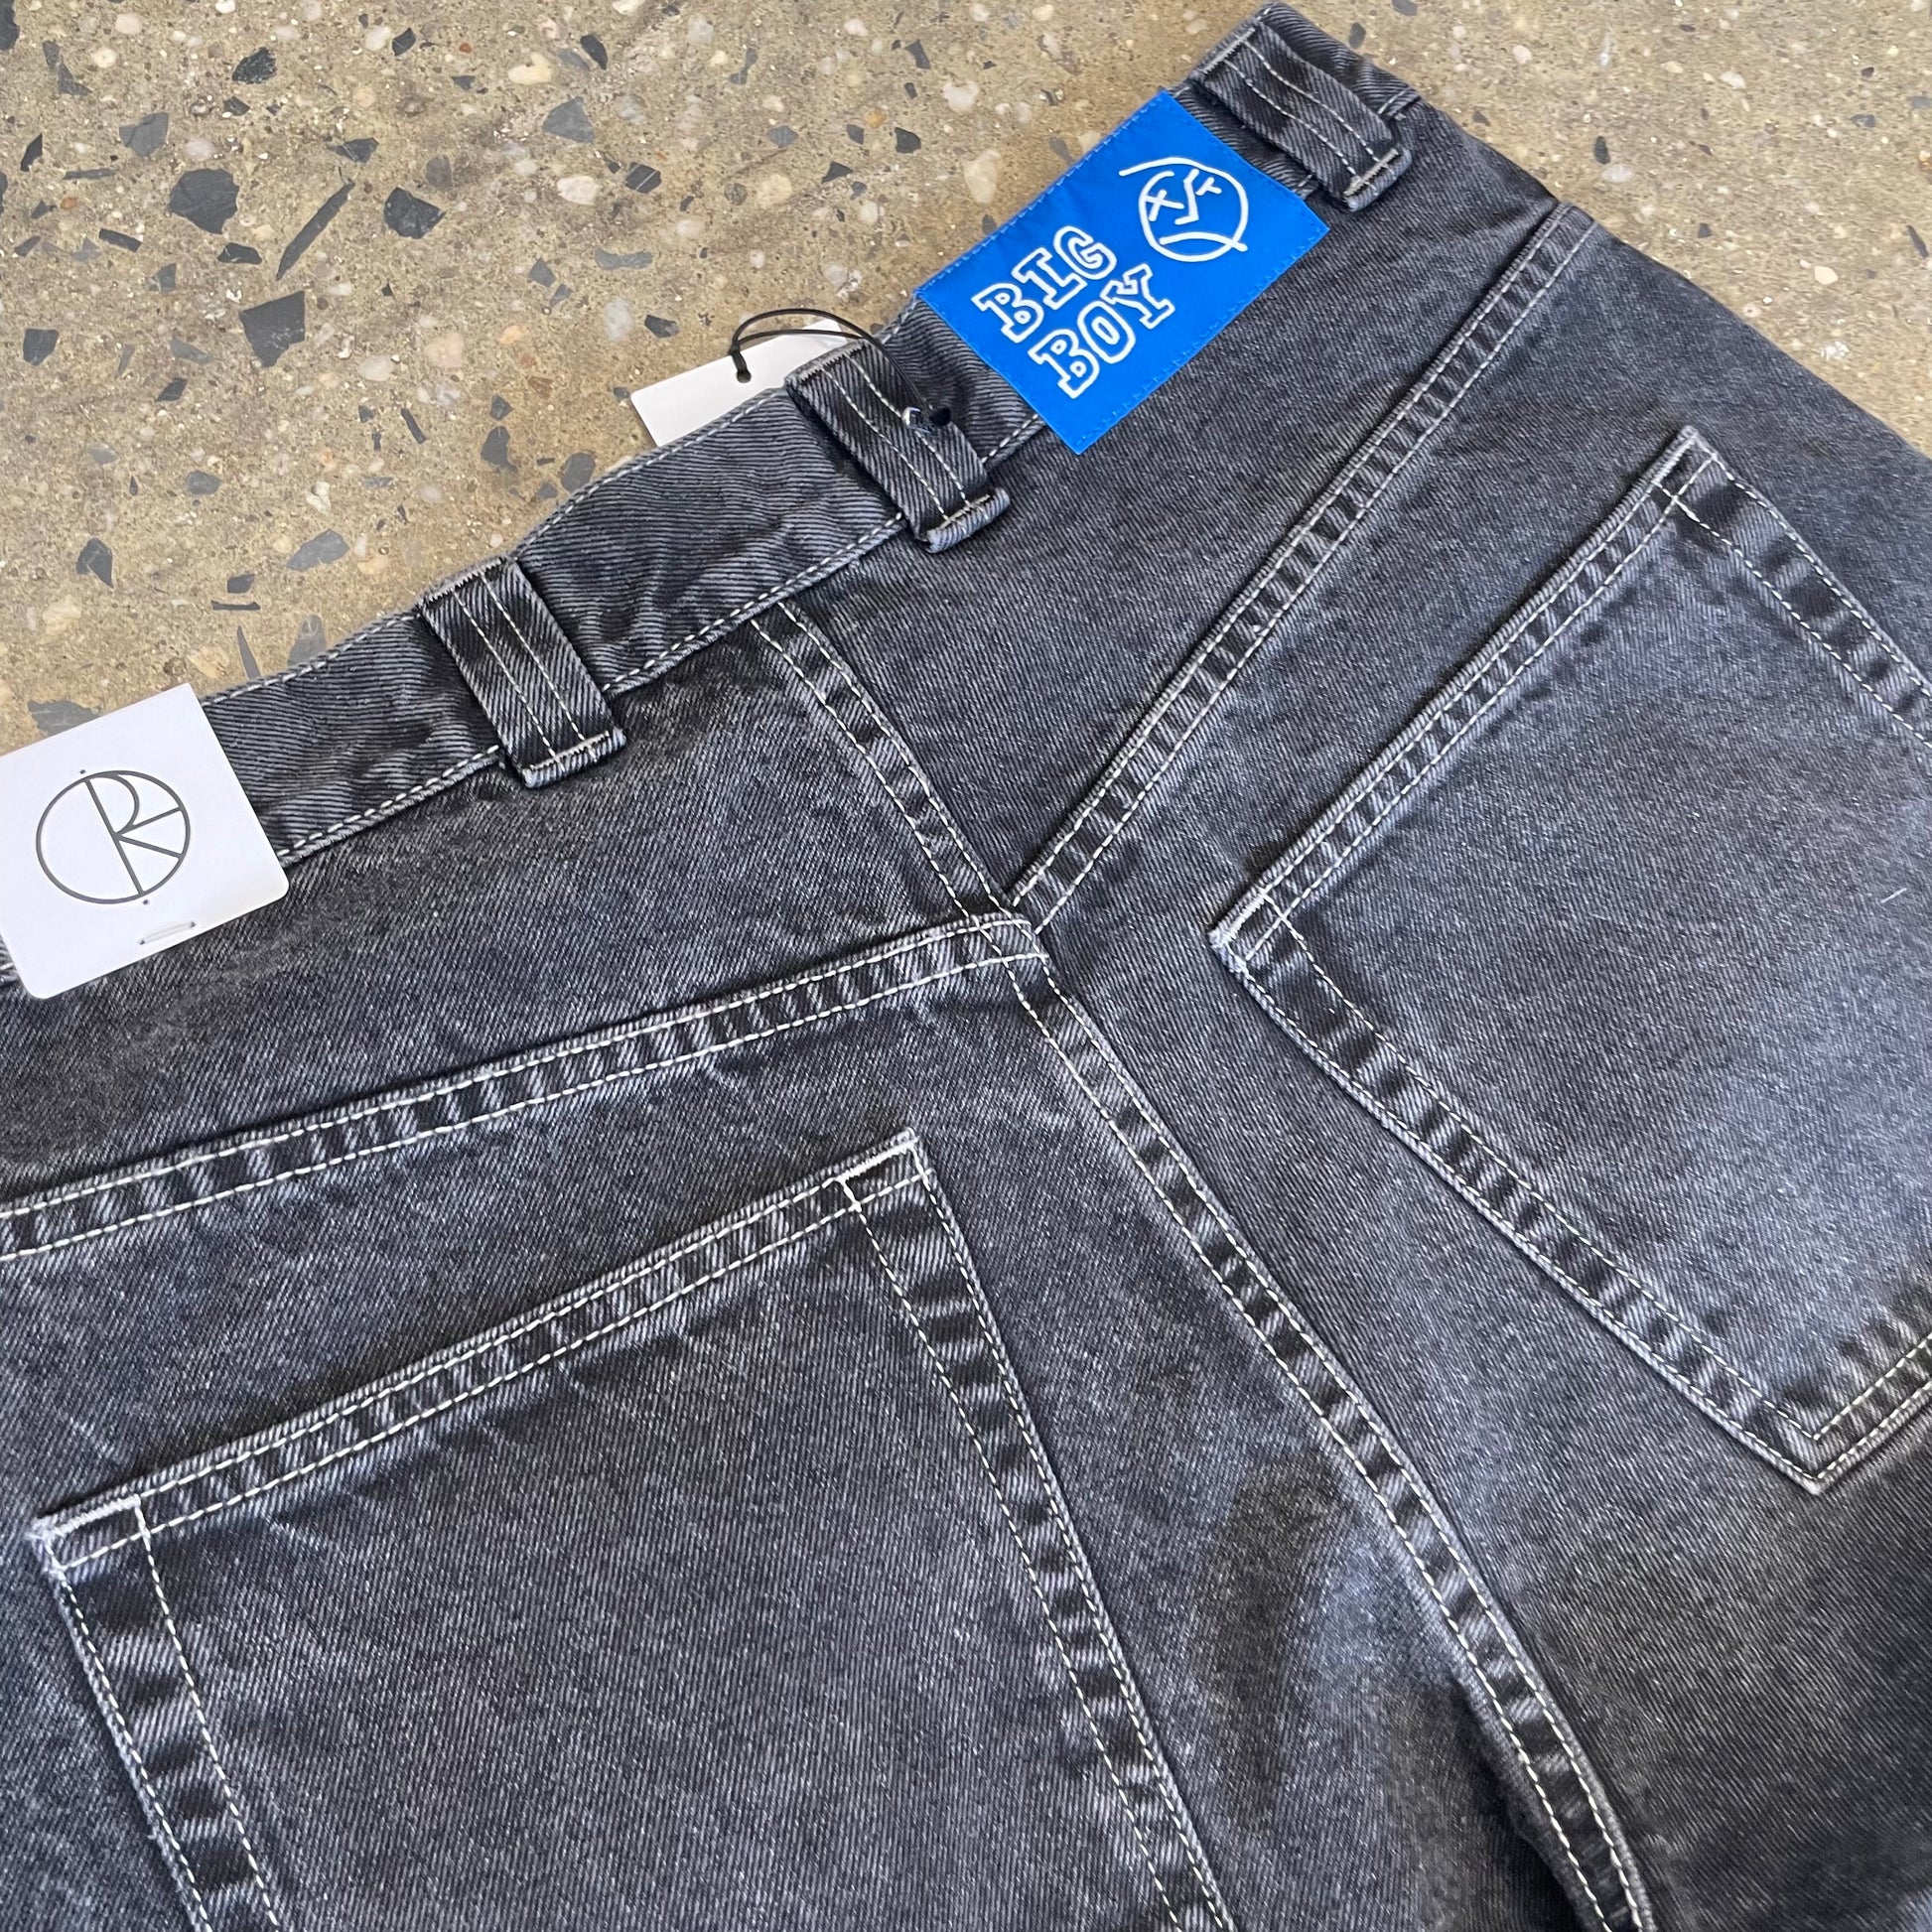 closeup of back pockets with blue patch logo on waistband